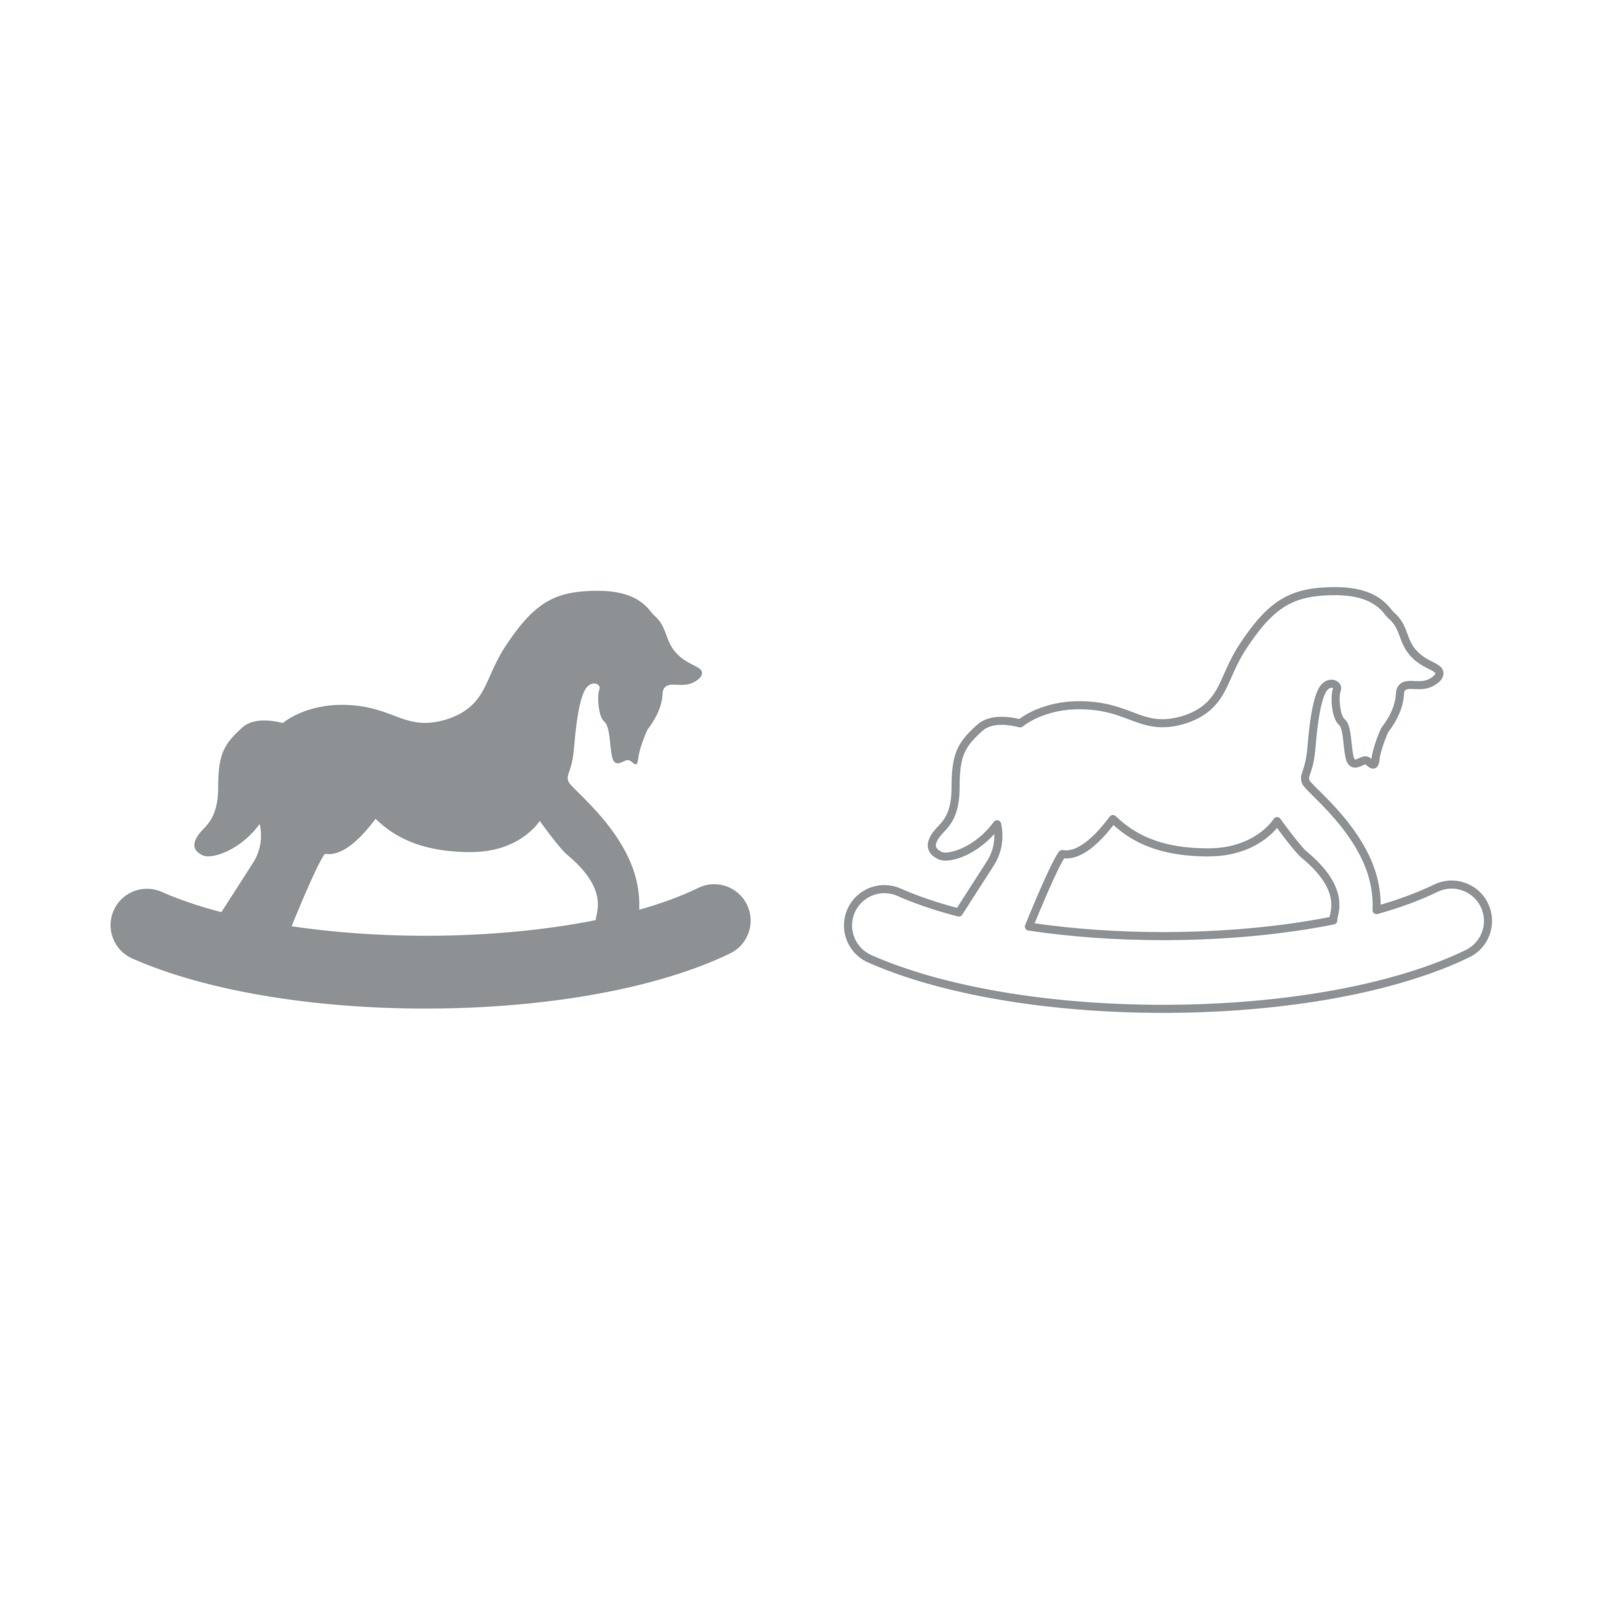 Toy horse icon. It is grey set .